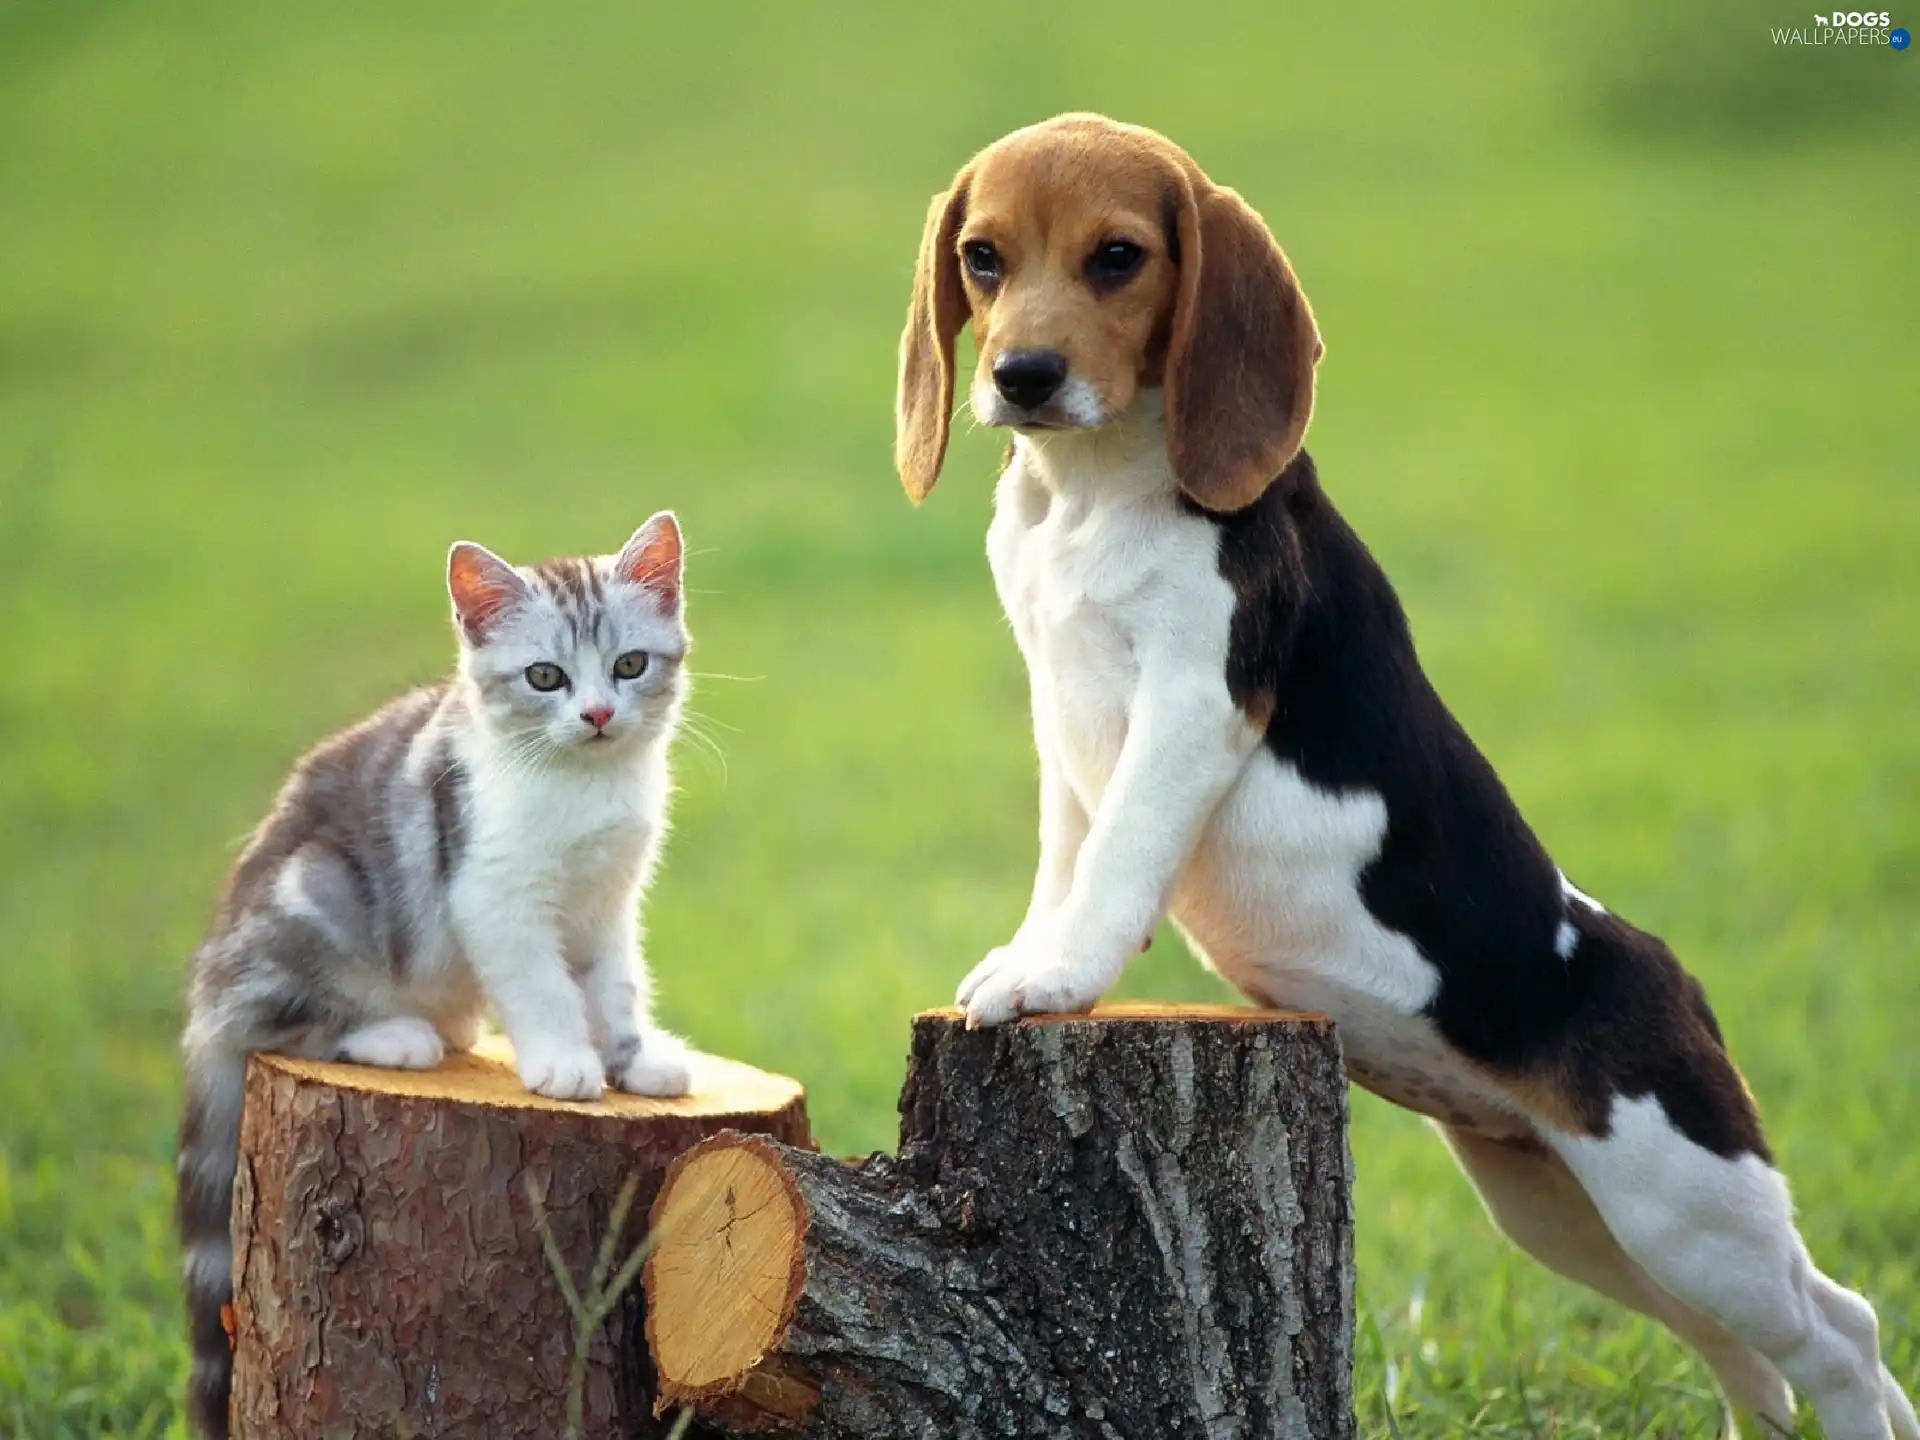 trees, Stems, doggy, viewes, kitten